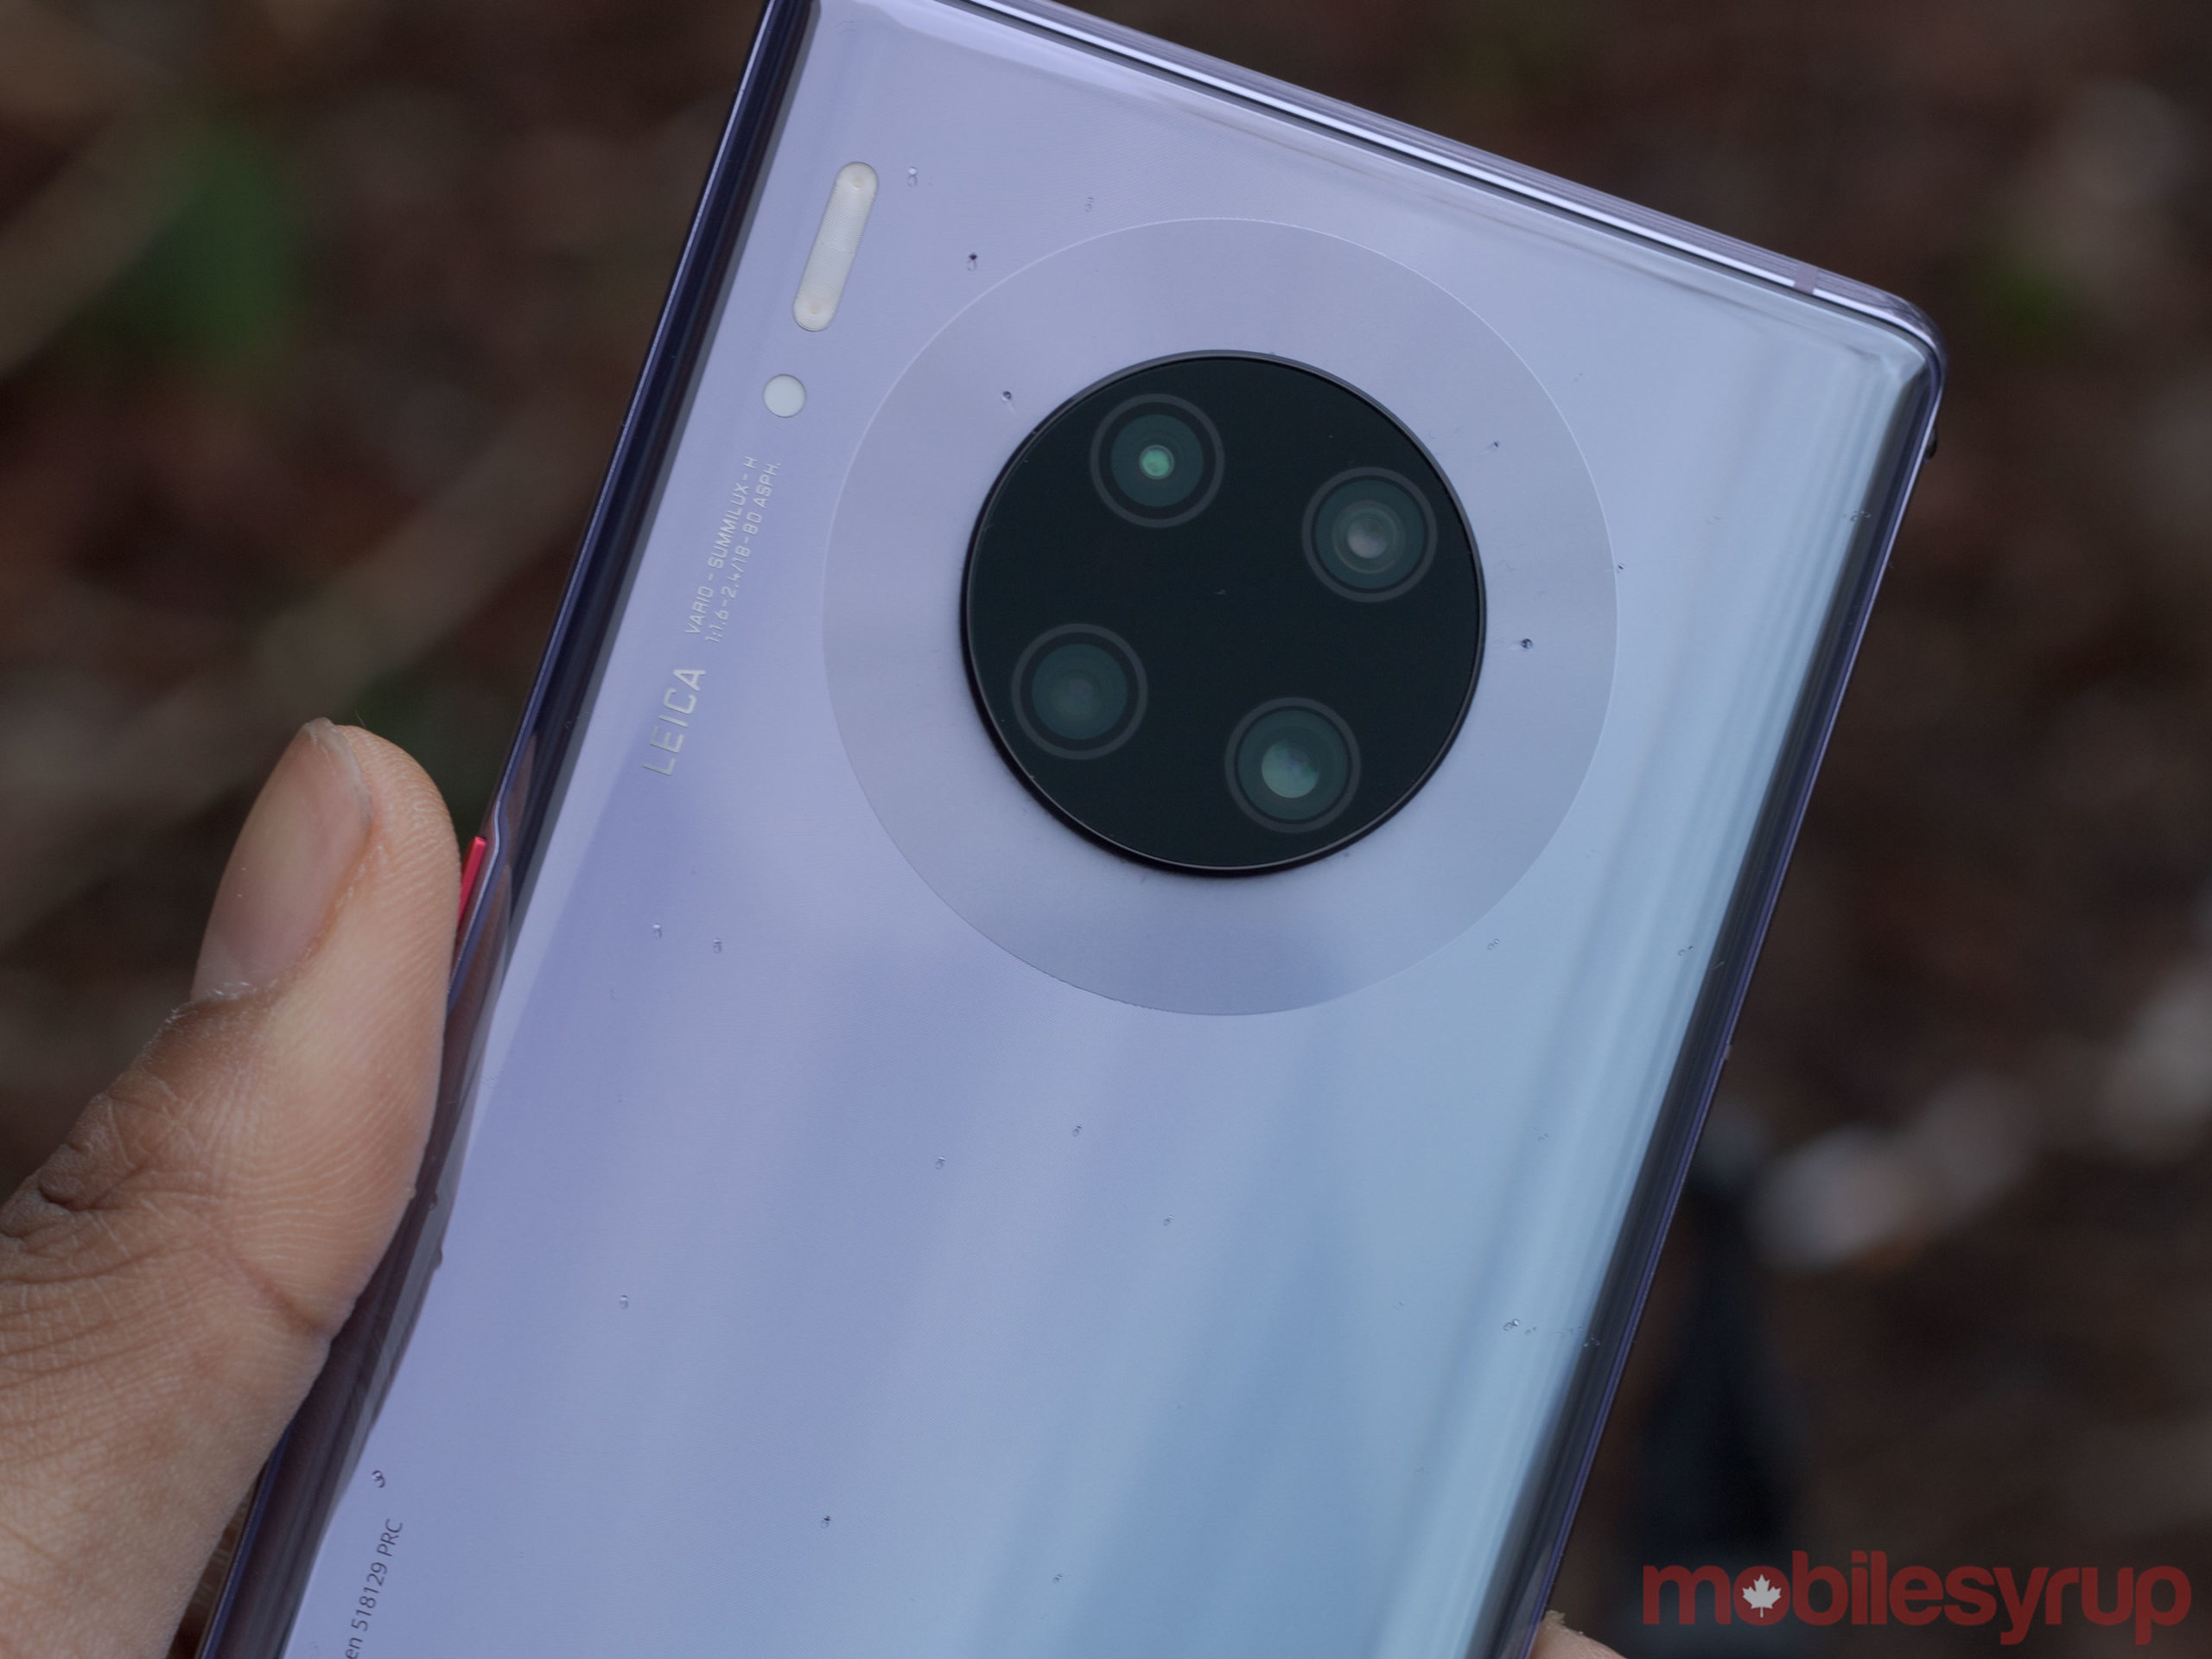 Huawei Mate 30 Pro Review: Great smartphone, but not for everyone